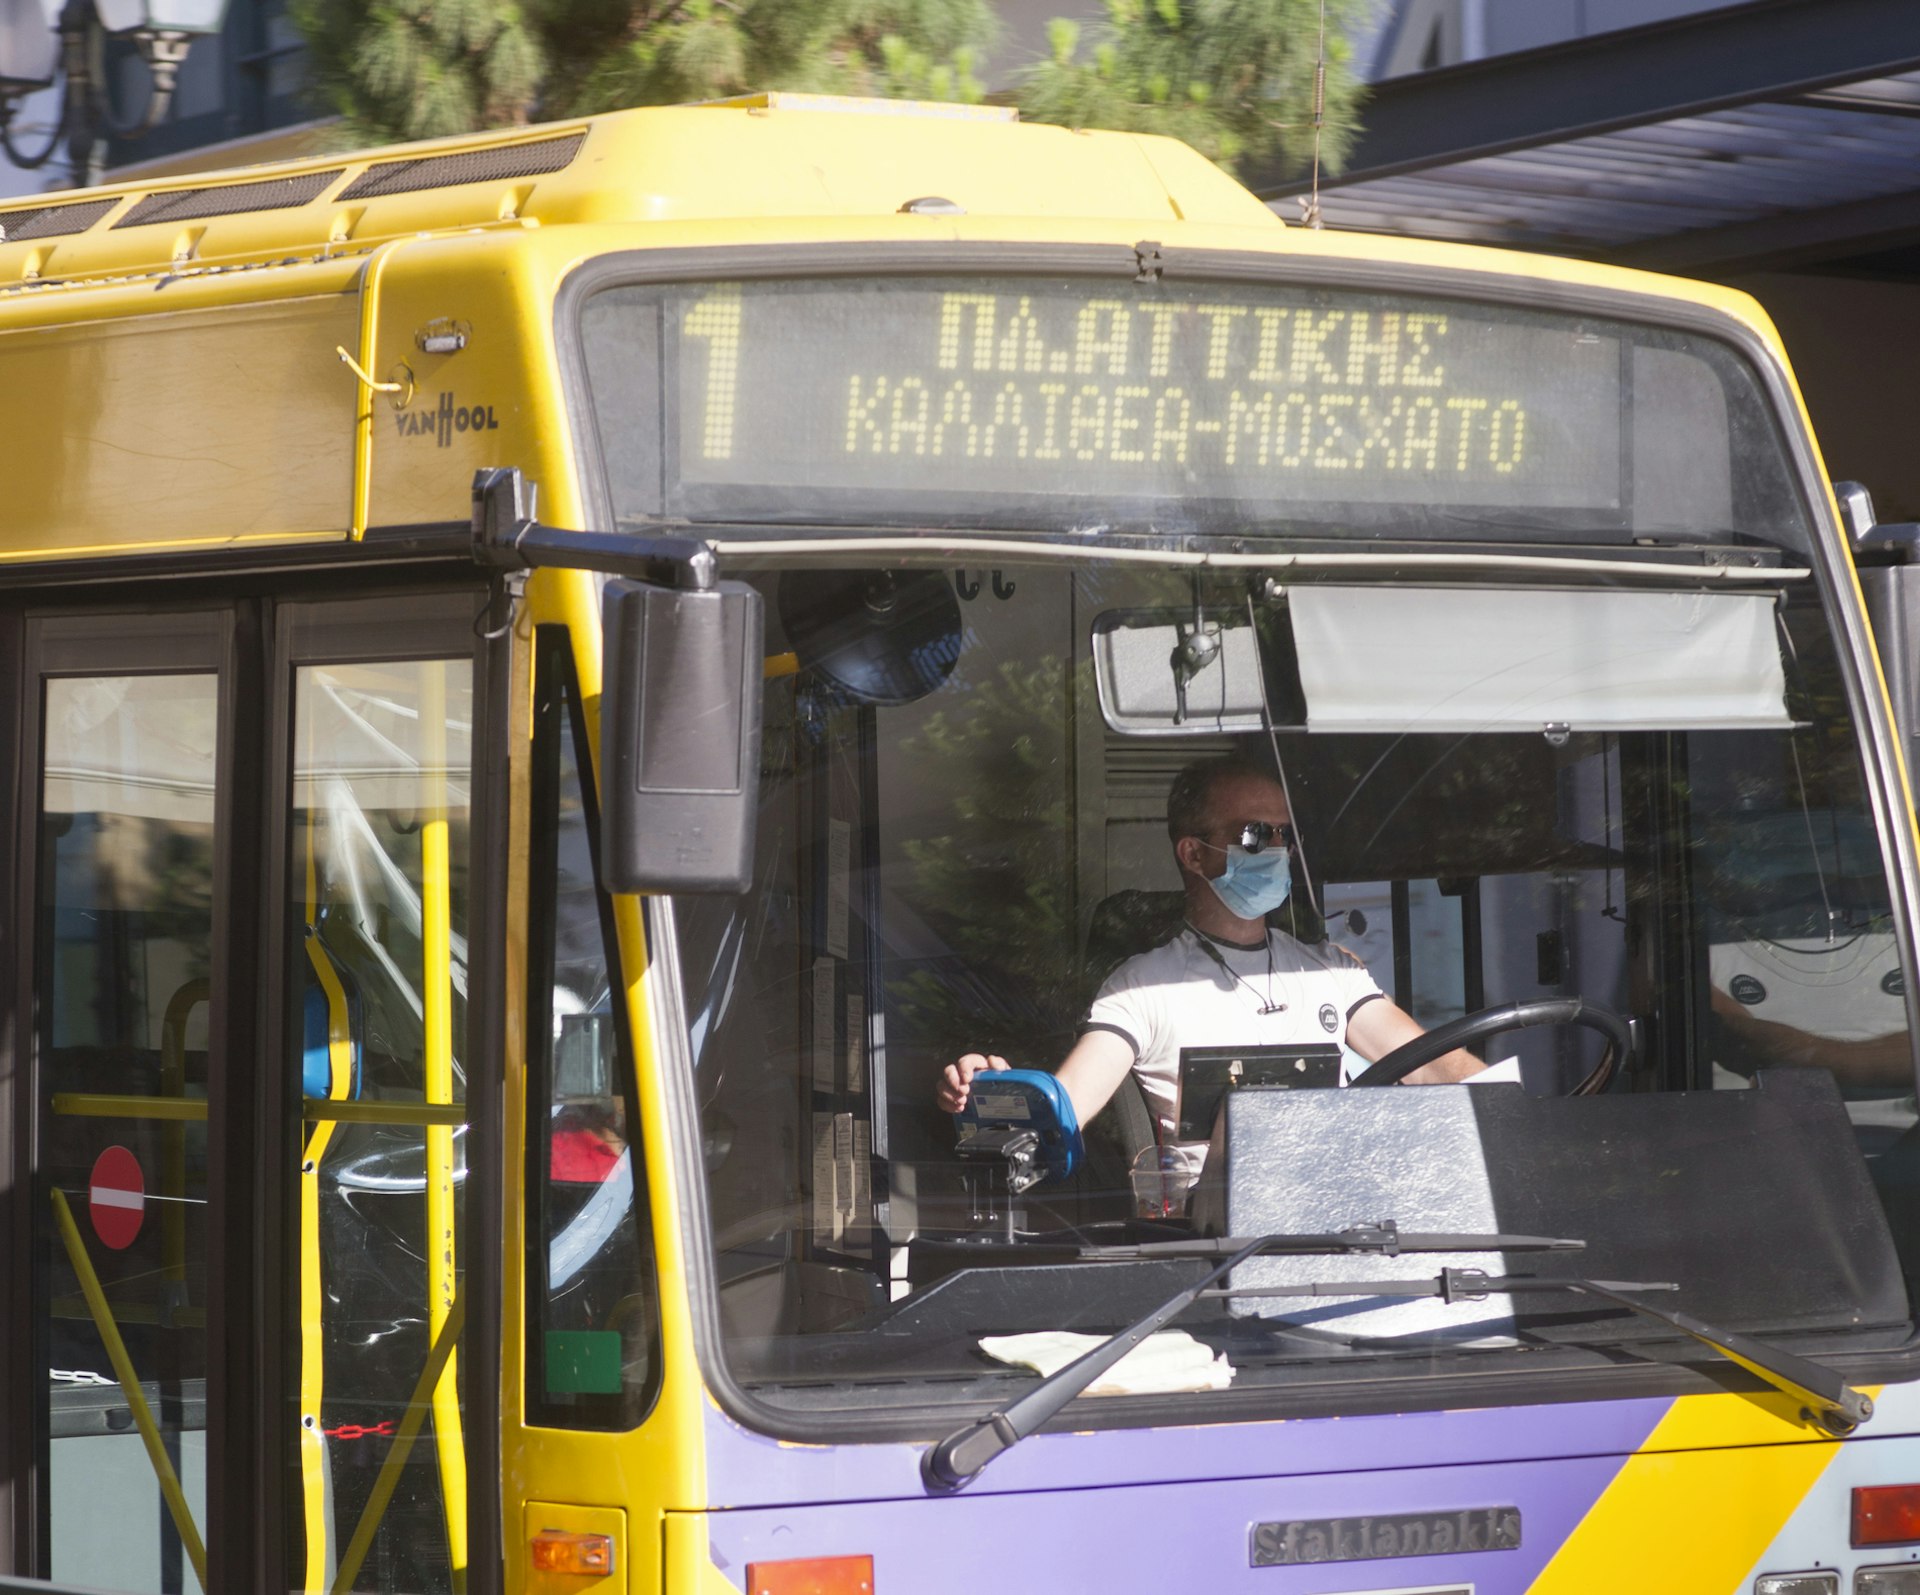 A yellow bus in traffic in Athens